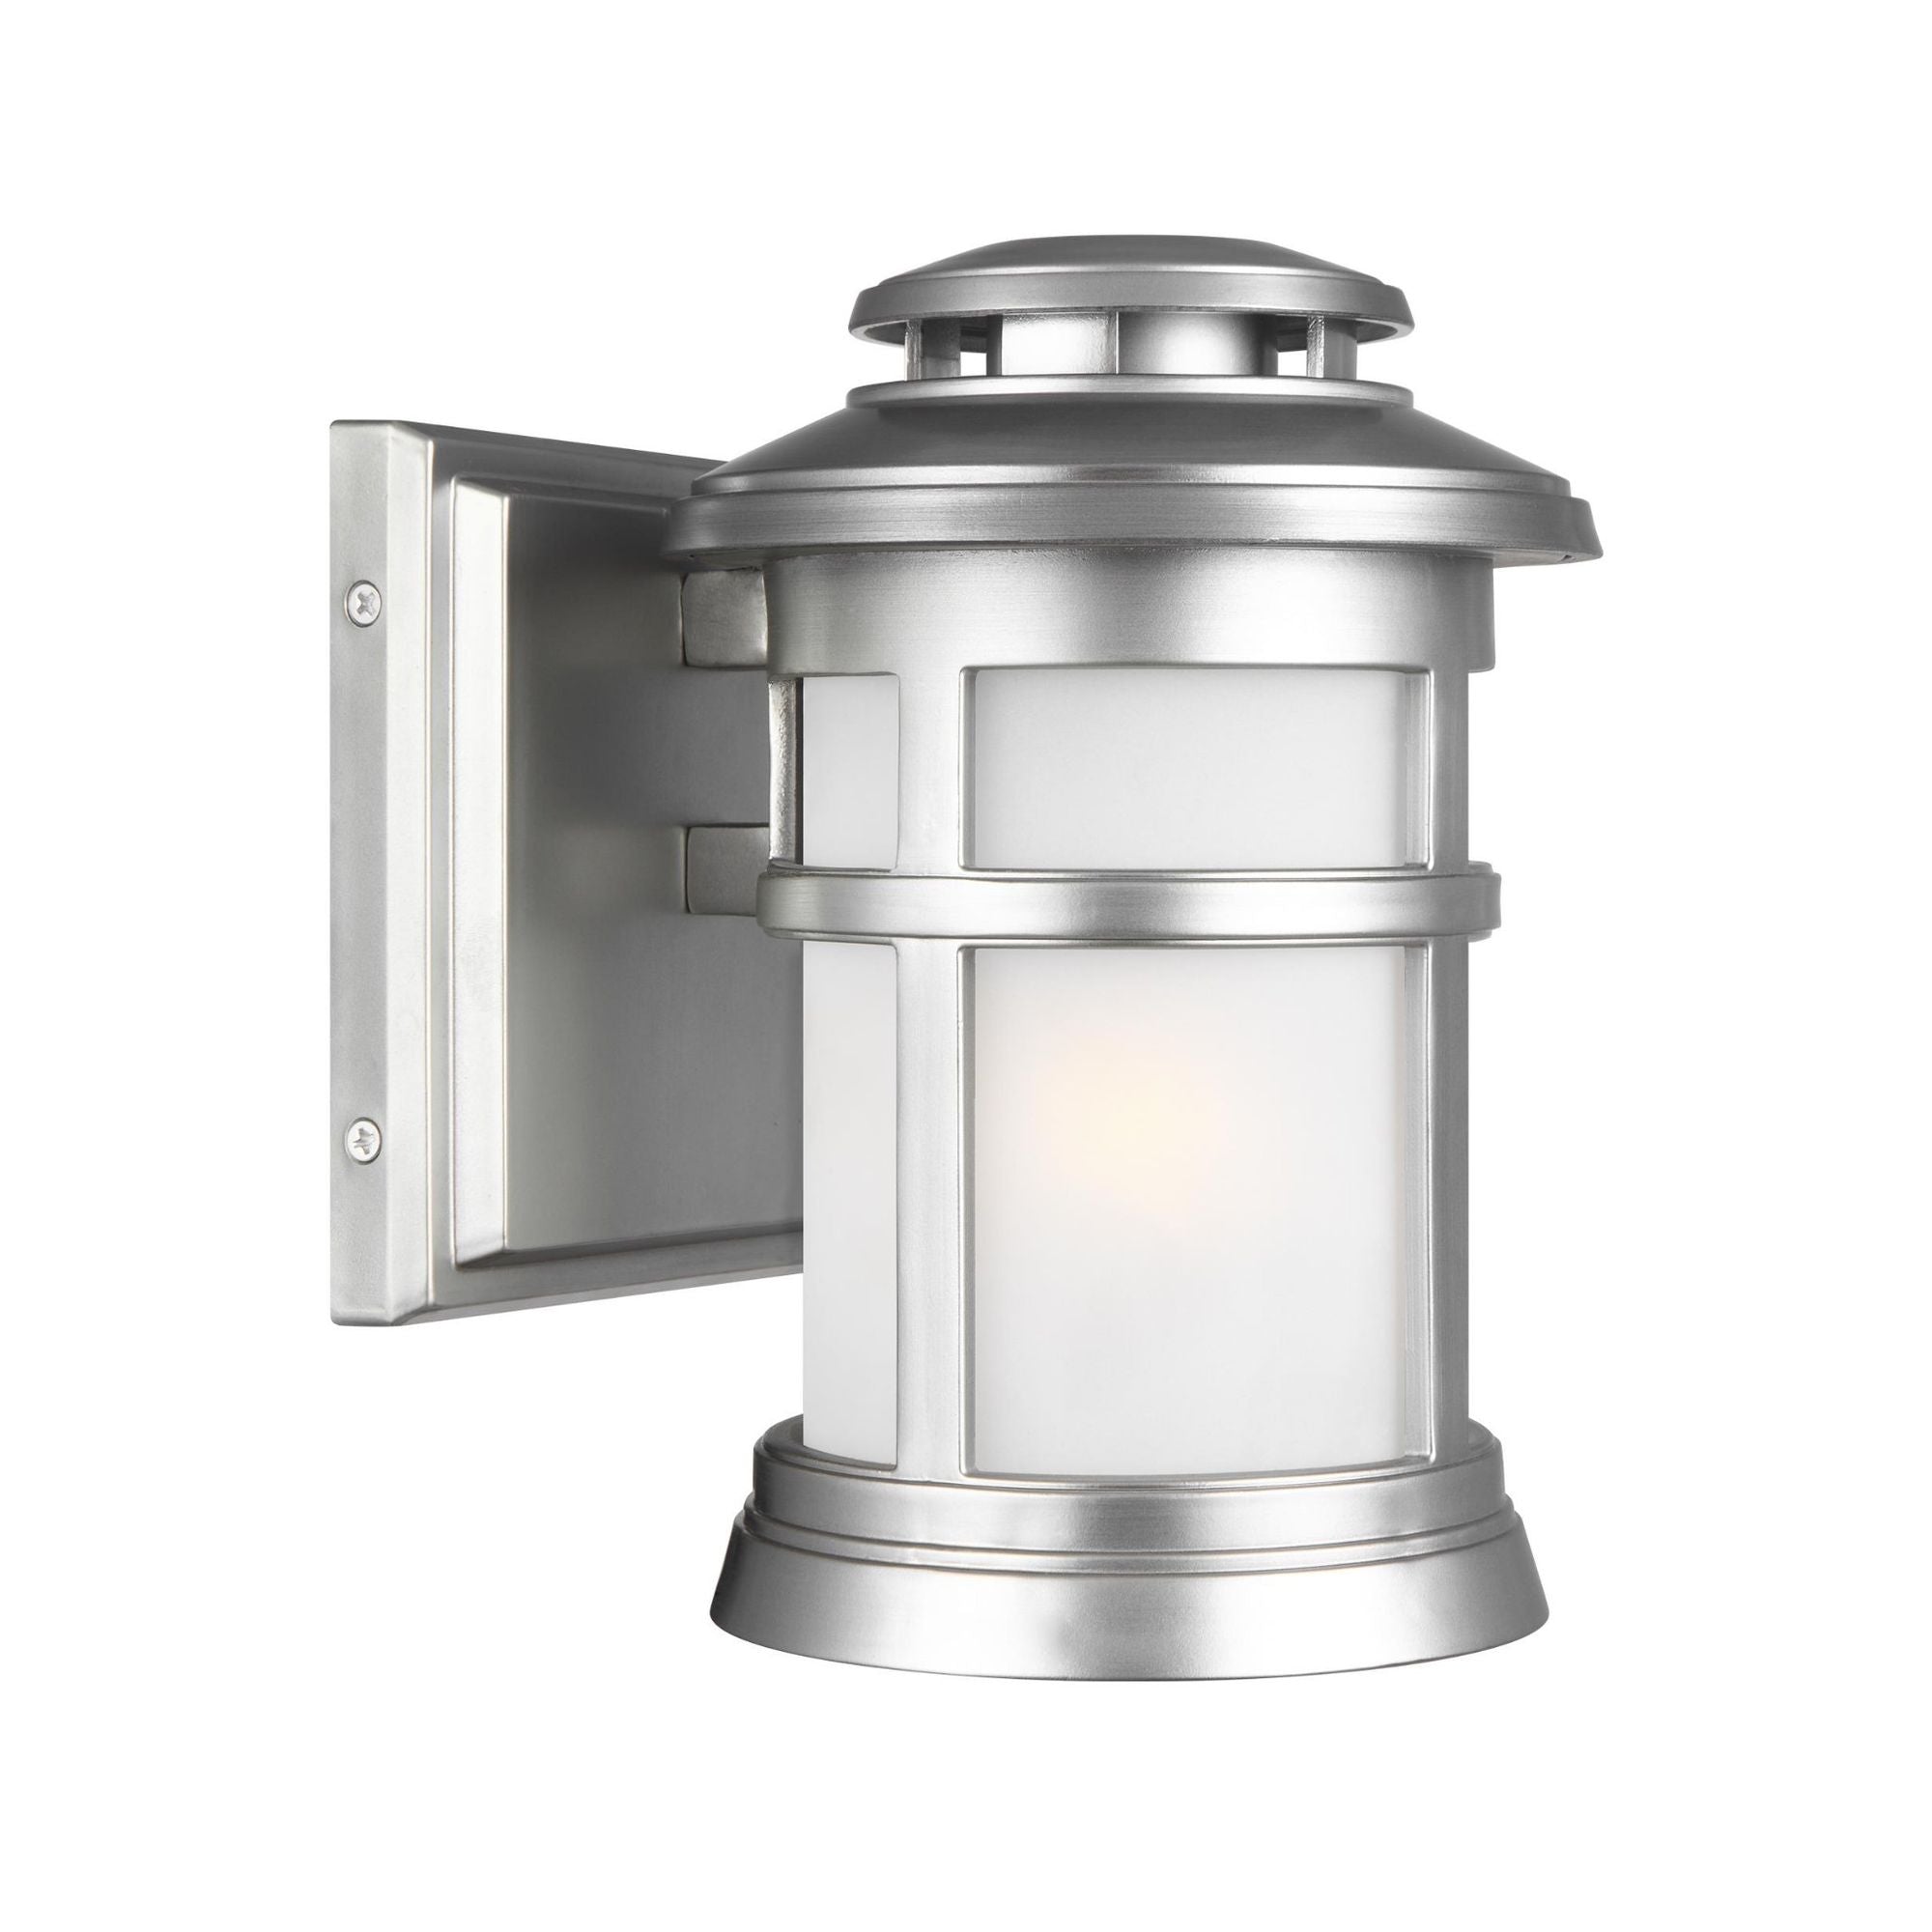 Sean Lavin Newport Extra Small Lantern in Painted Brushed Steel